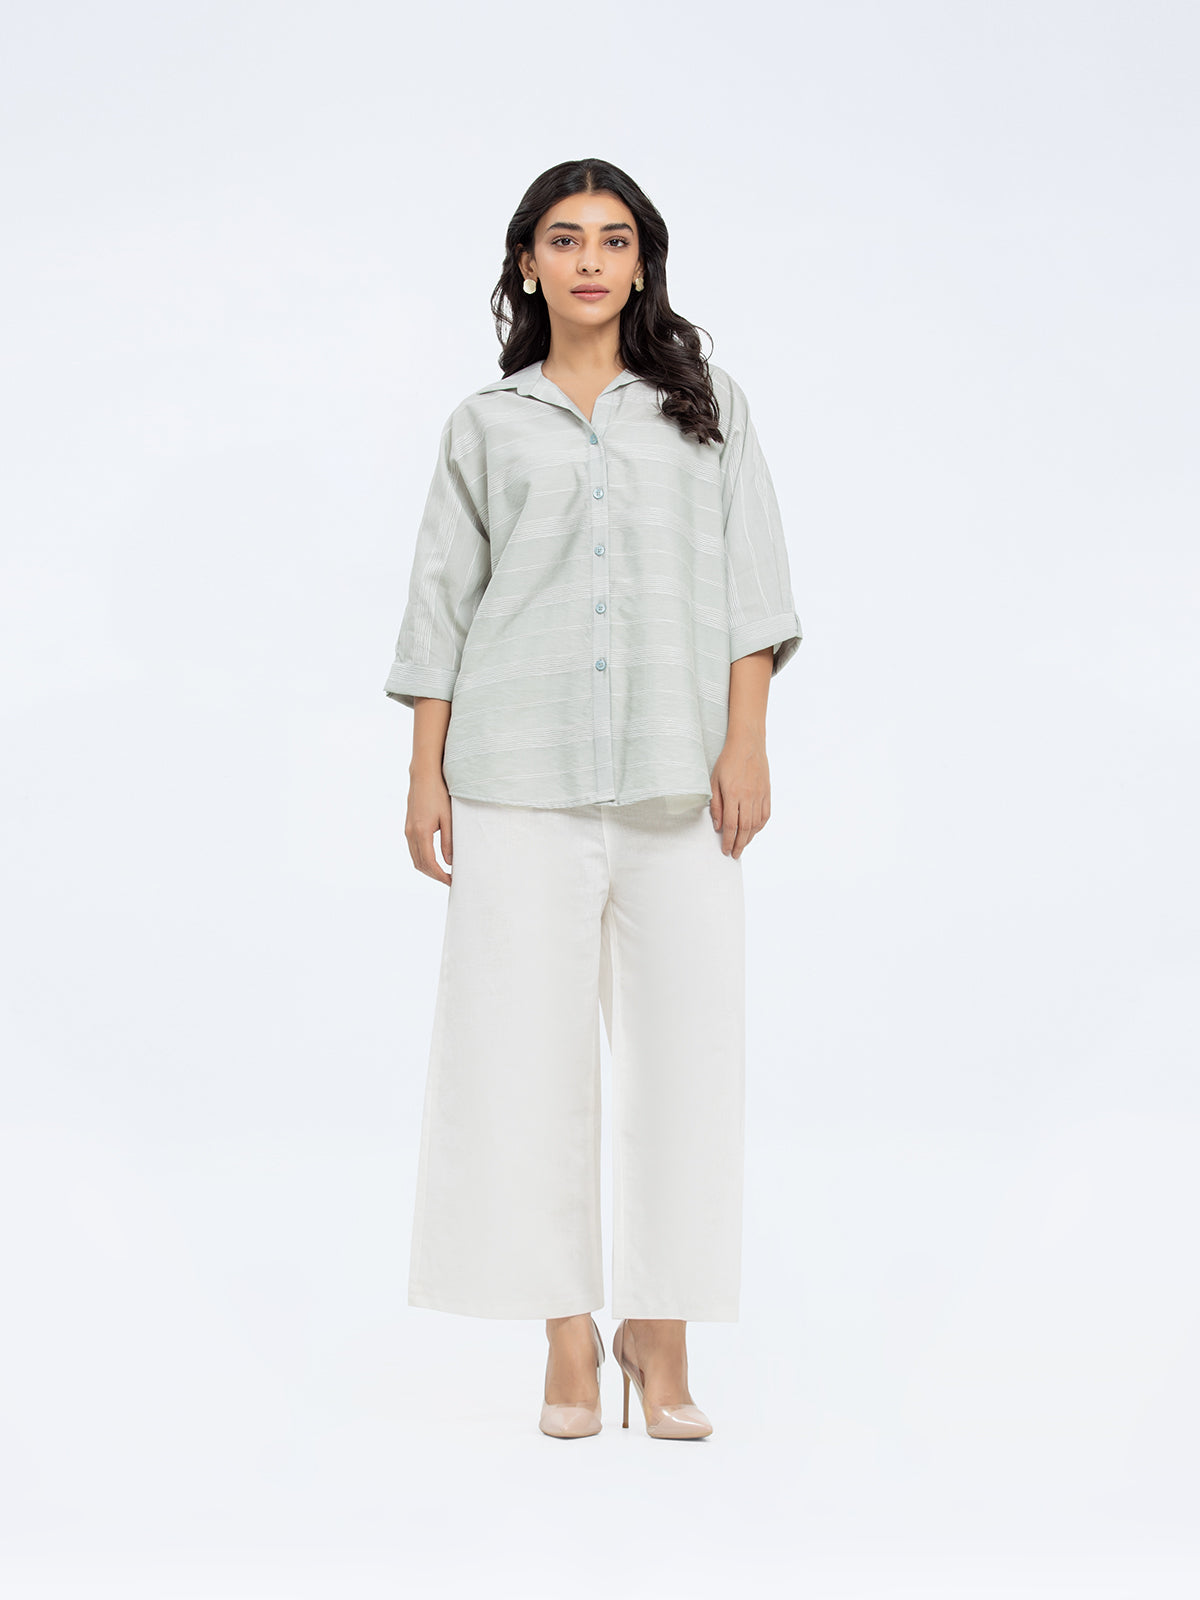 Relaxed Fit Button Up Shirt - FWTS24-083